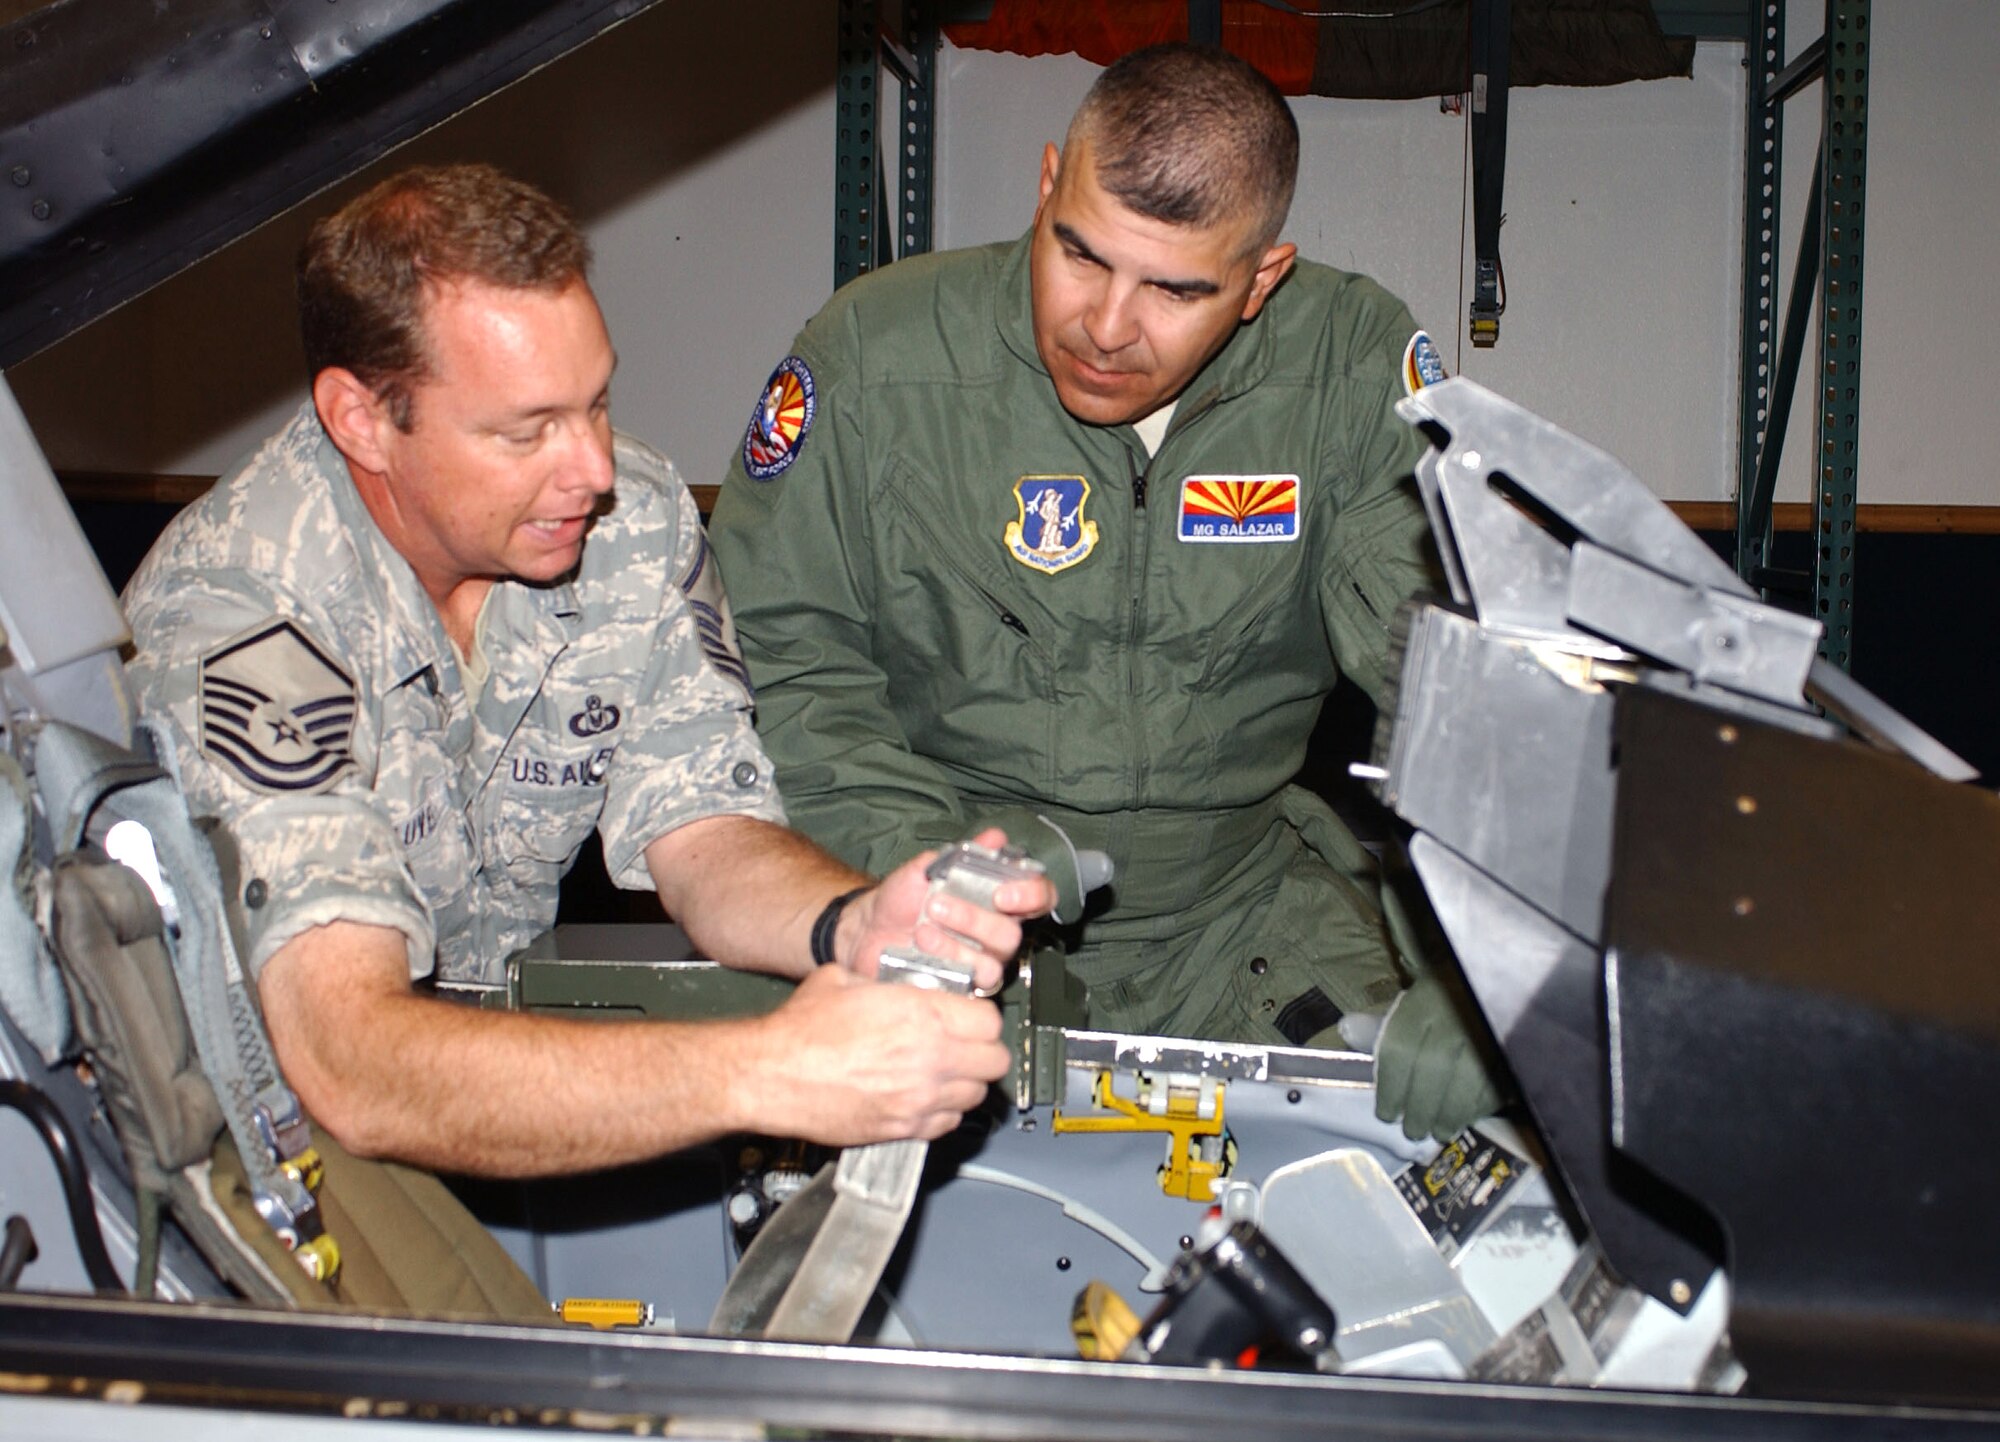 Army Maj. Gen. Hugo E. Salazar (right), Adjutant General and Commanding General of the Arizona National Guard, gets F-16 egress training from Master Sgt. Don Lauver at the 162nd Fighter Wing before his flight on July 7. Egress training teaches pilots and guest riders flight safety procedures for the high-performance jet. The experience was instrumental in familiarizing General Salazar with the wing's full-time mission to train U.S. and partner nation fighter pilots. (Air National Guard photo by Staff Sgt. Sarah Elliott)